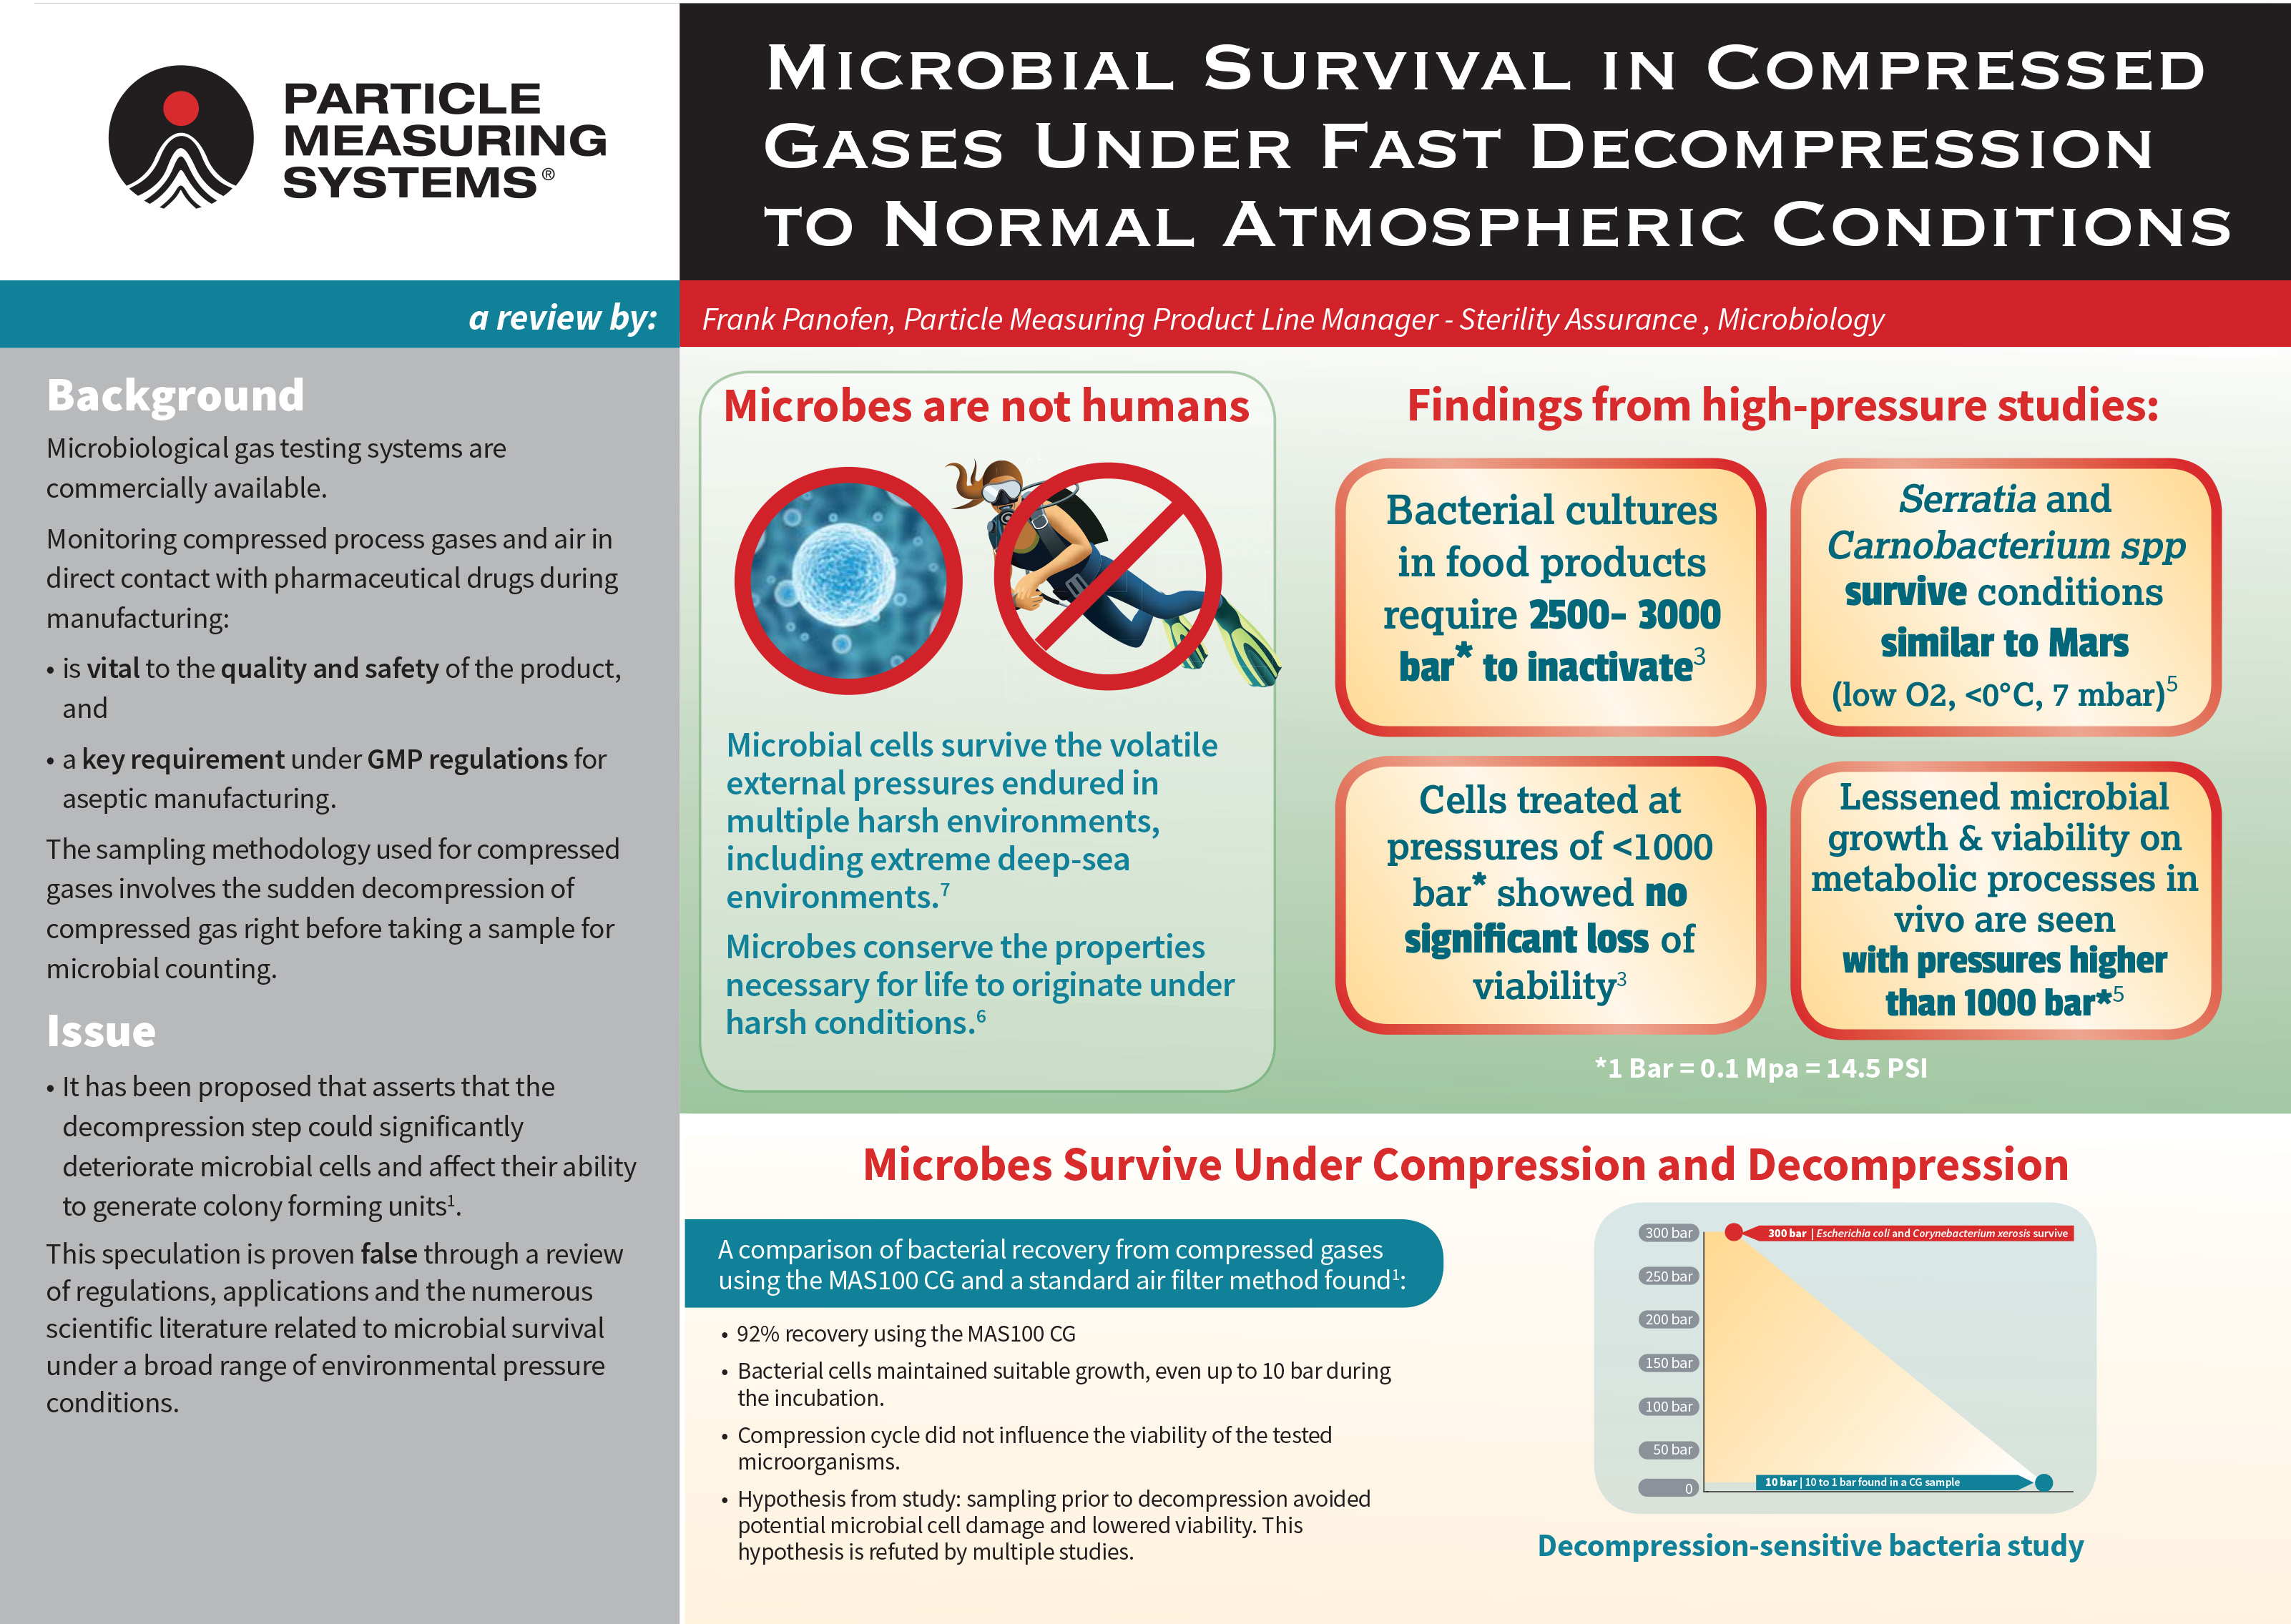 Poster: Microbial survival in compressed gases under fast decompression to normal atmospheric conditions